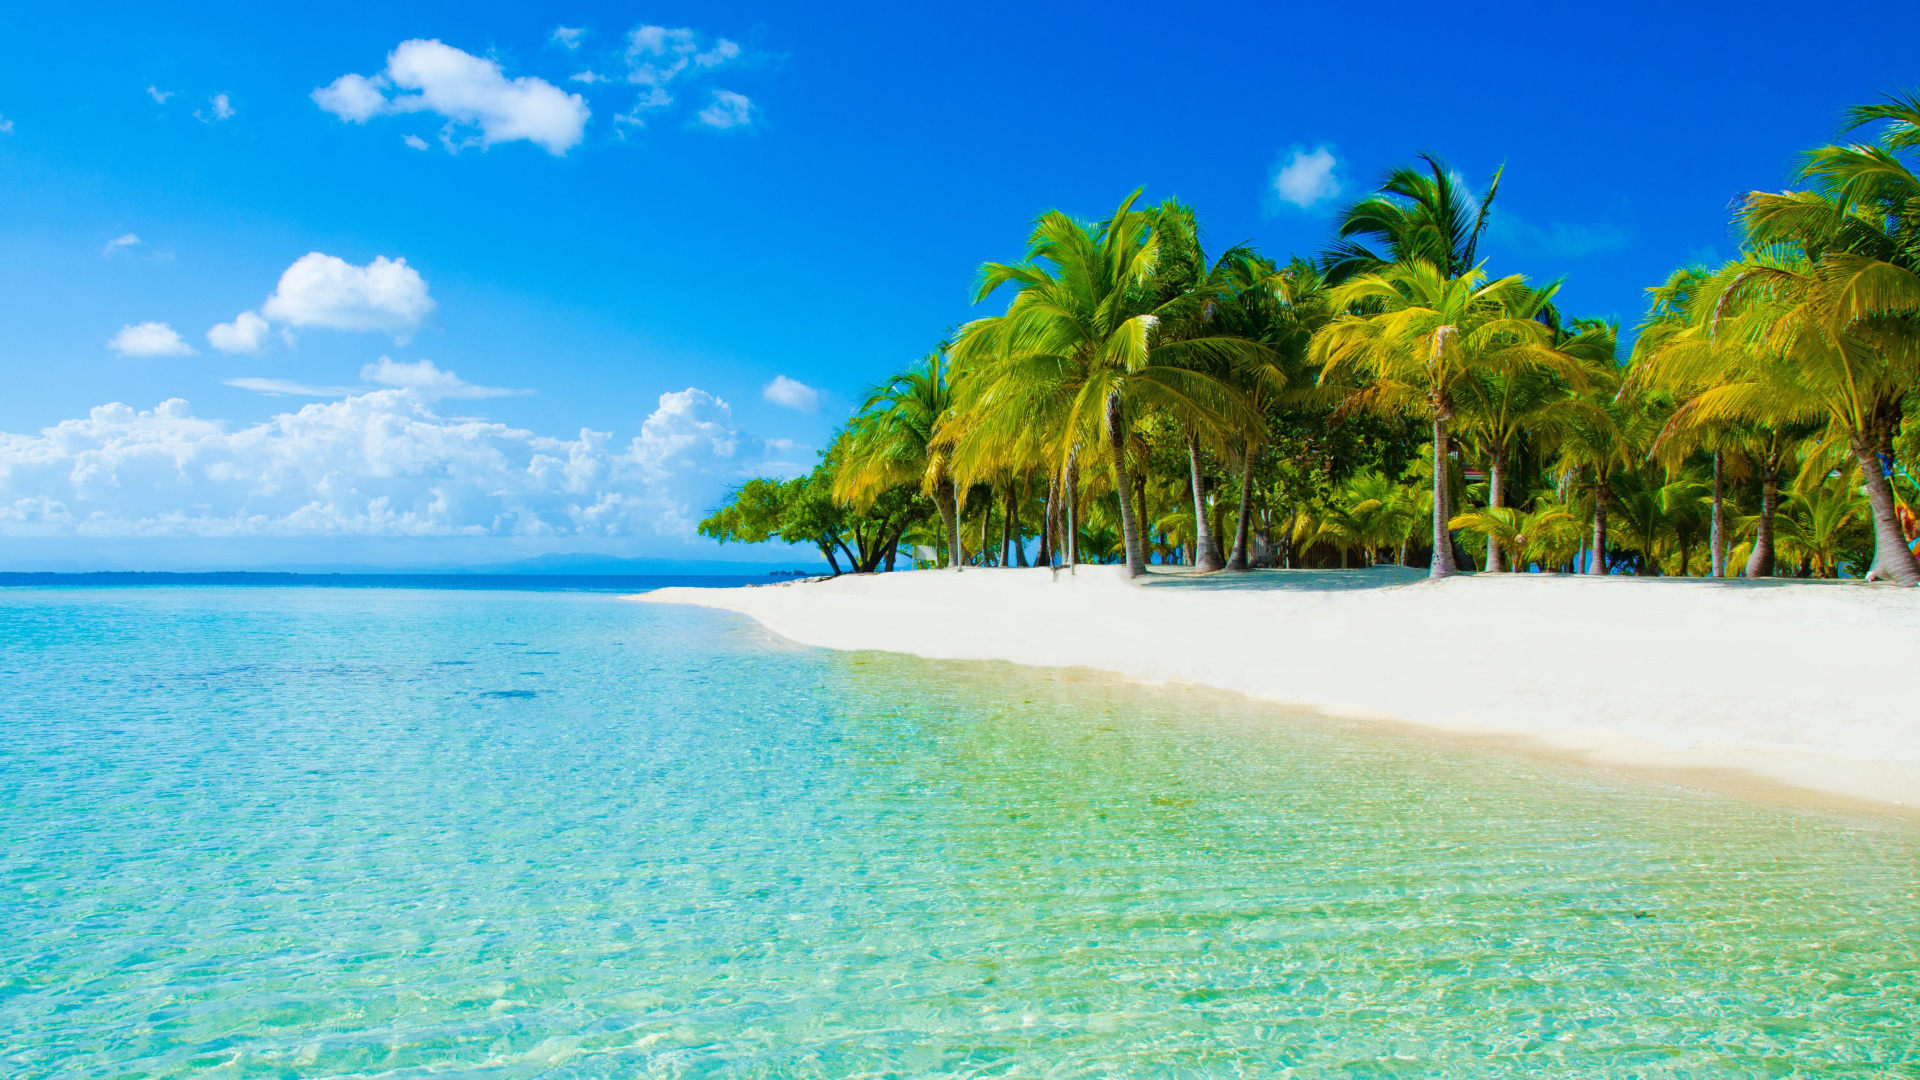 Green Palm Tree on White Sand Beach During Daytime. Wallpaper in 1920x1080 Resolution